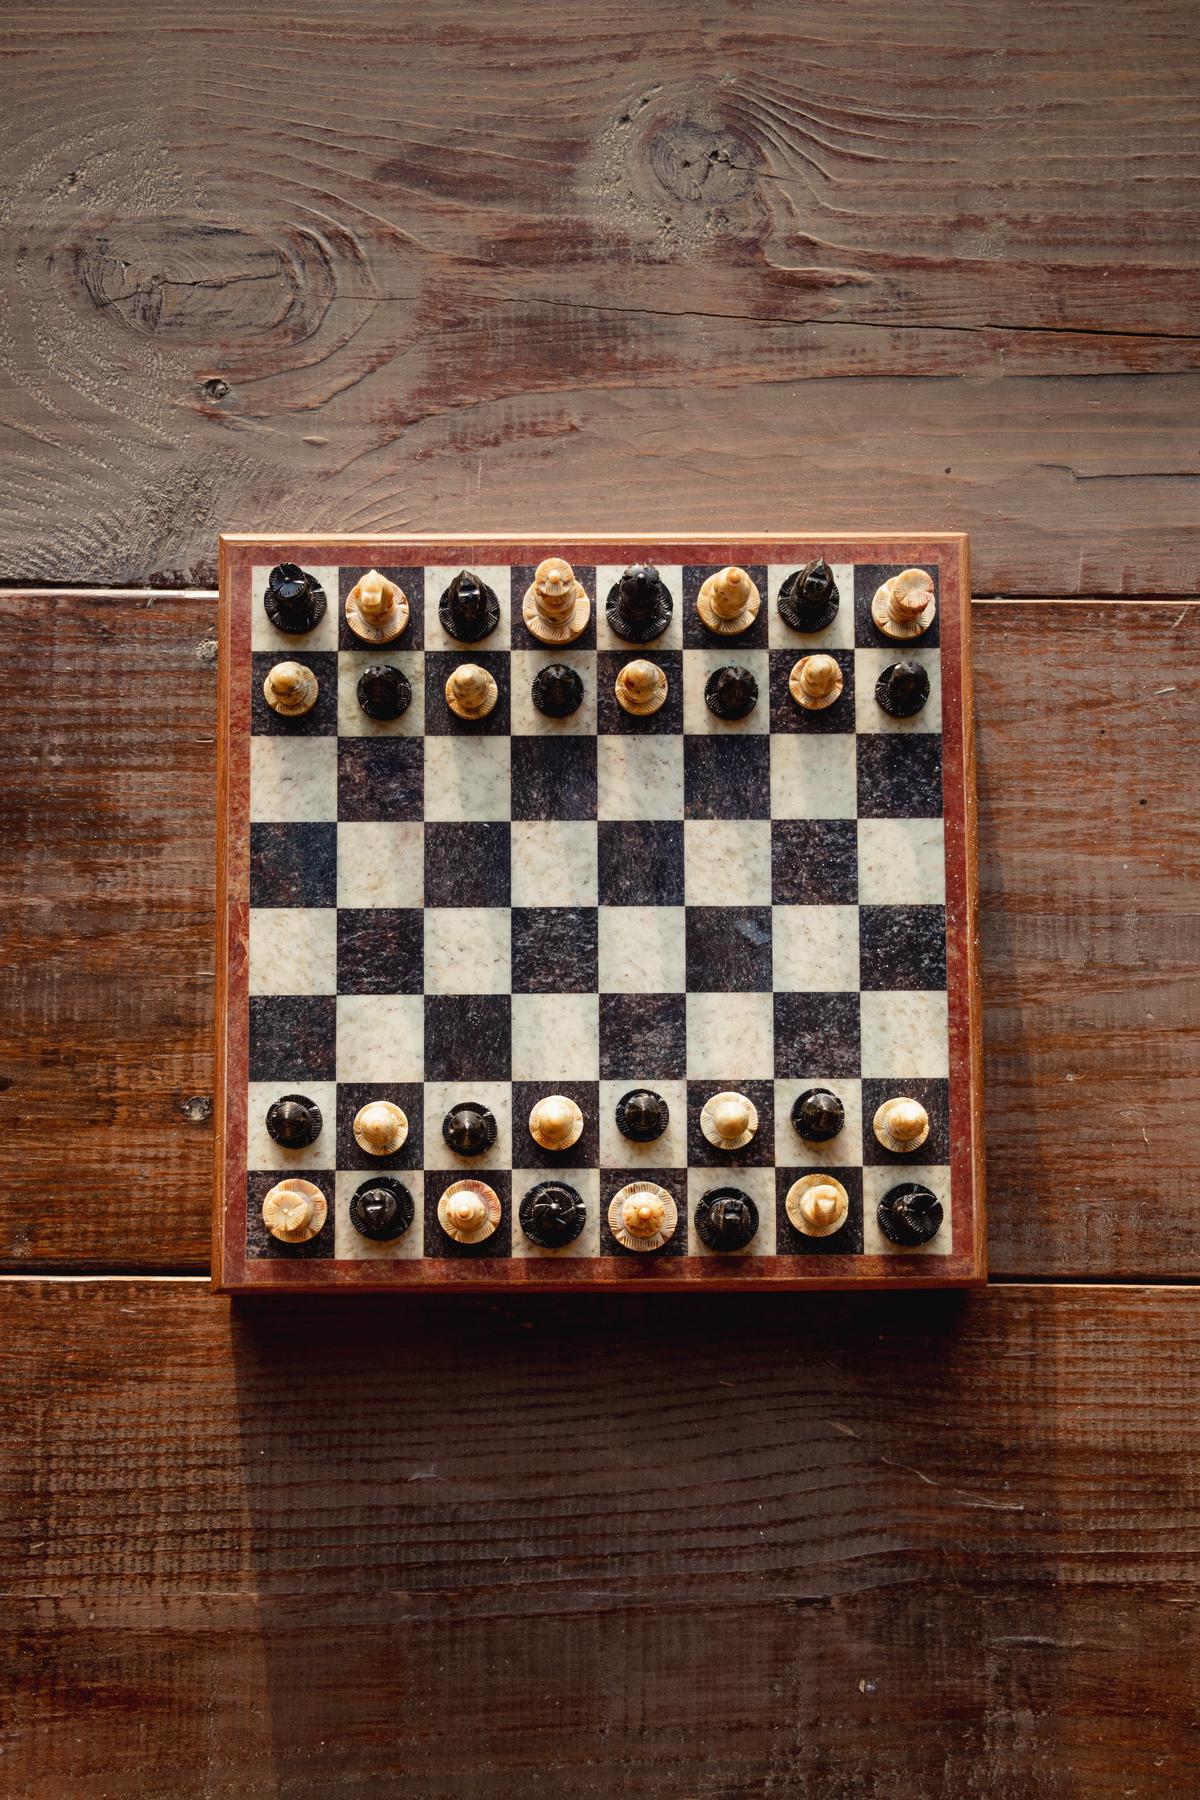 An image illustrating a chessboard with chess pieces on it, symbolizing navigating through complex tax law changes in estate planning.